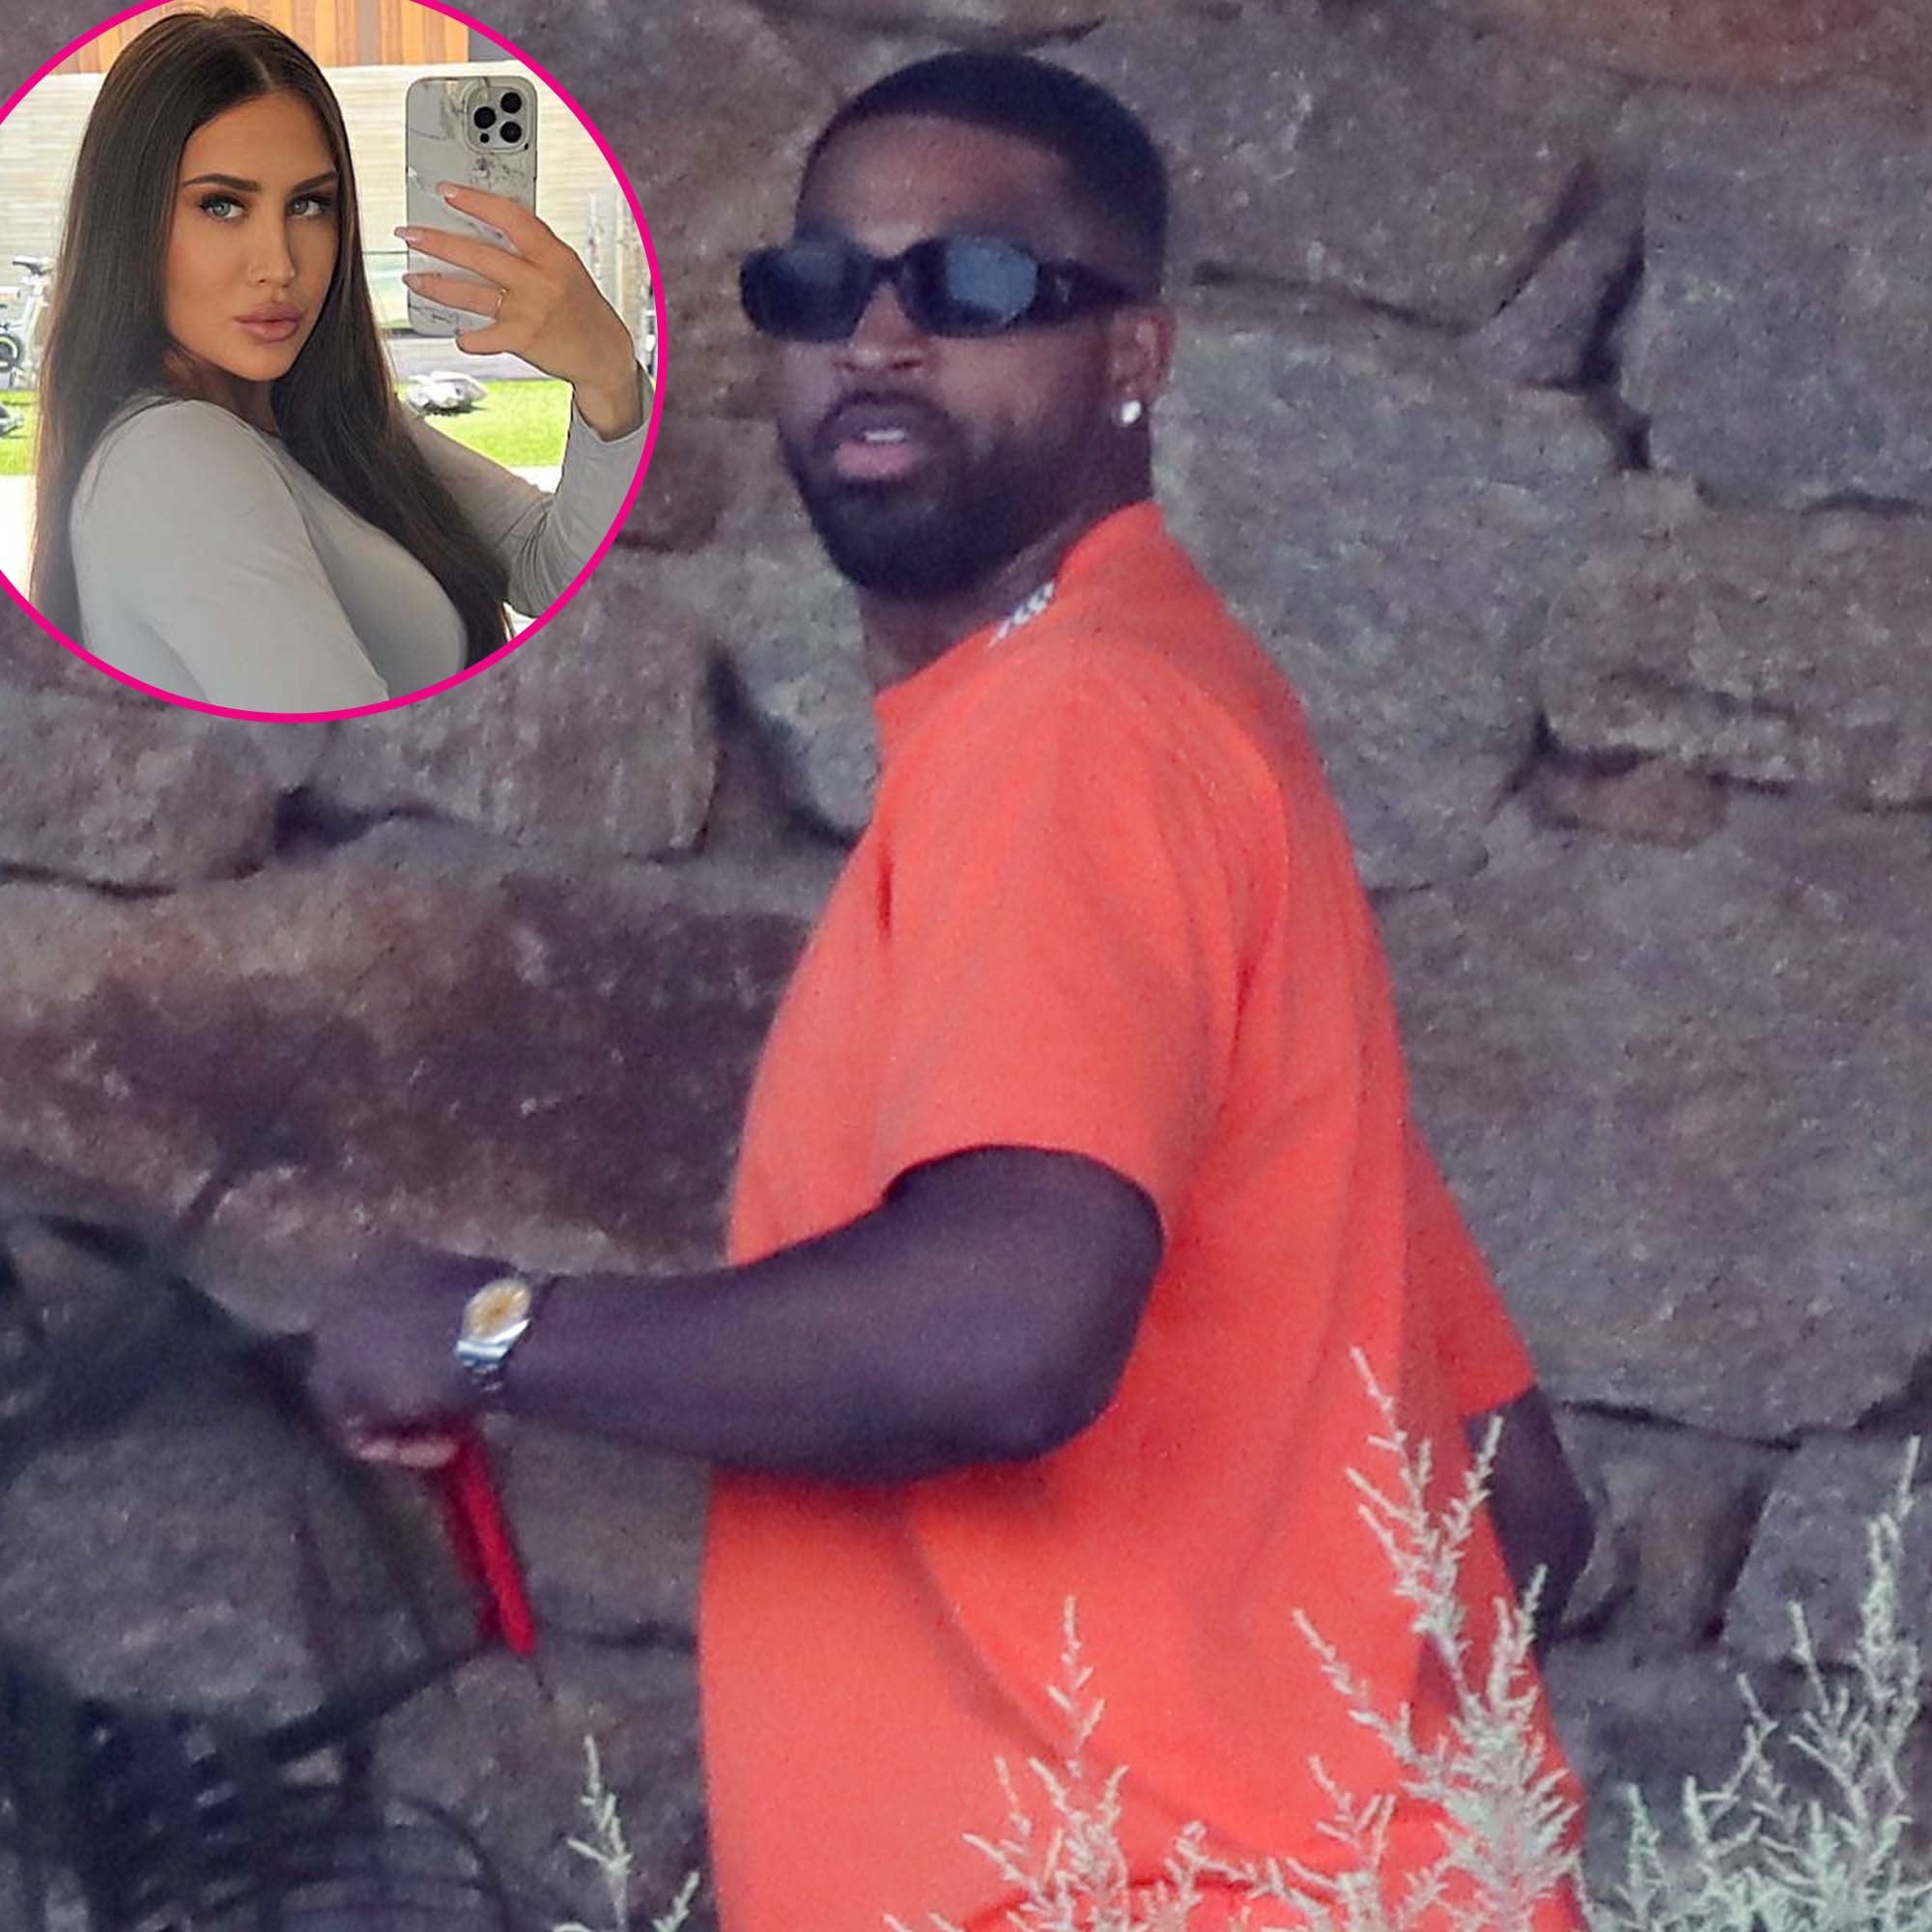 Tristan Thompson owes thousands of dollars in child support to